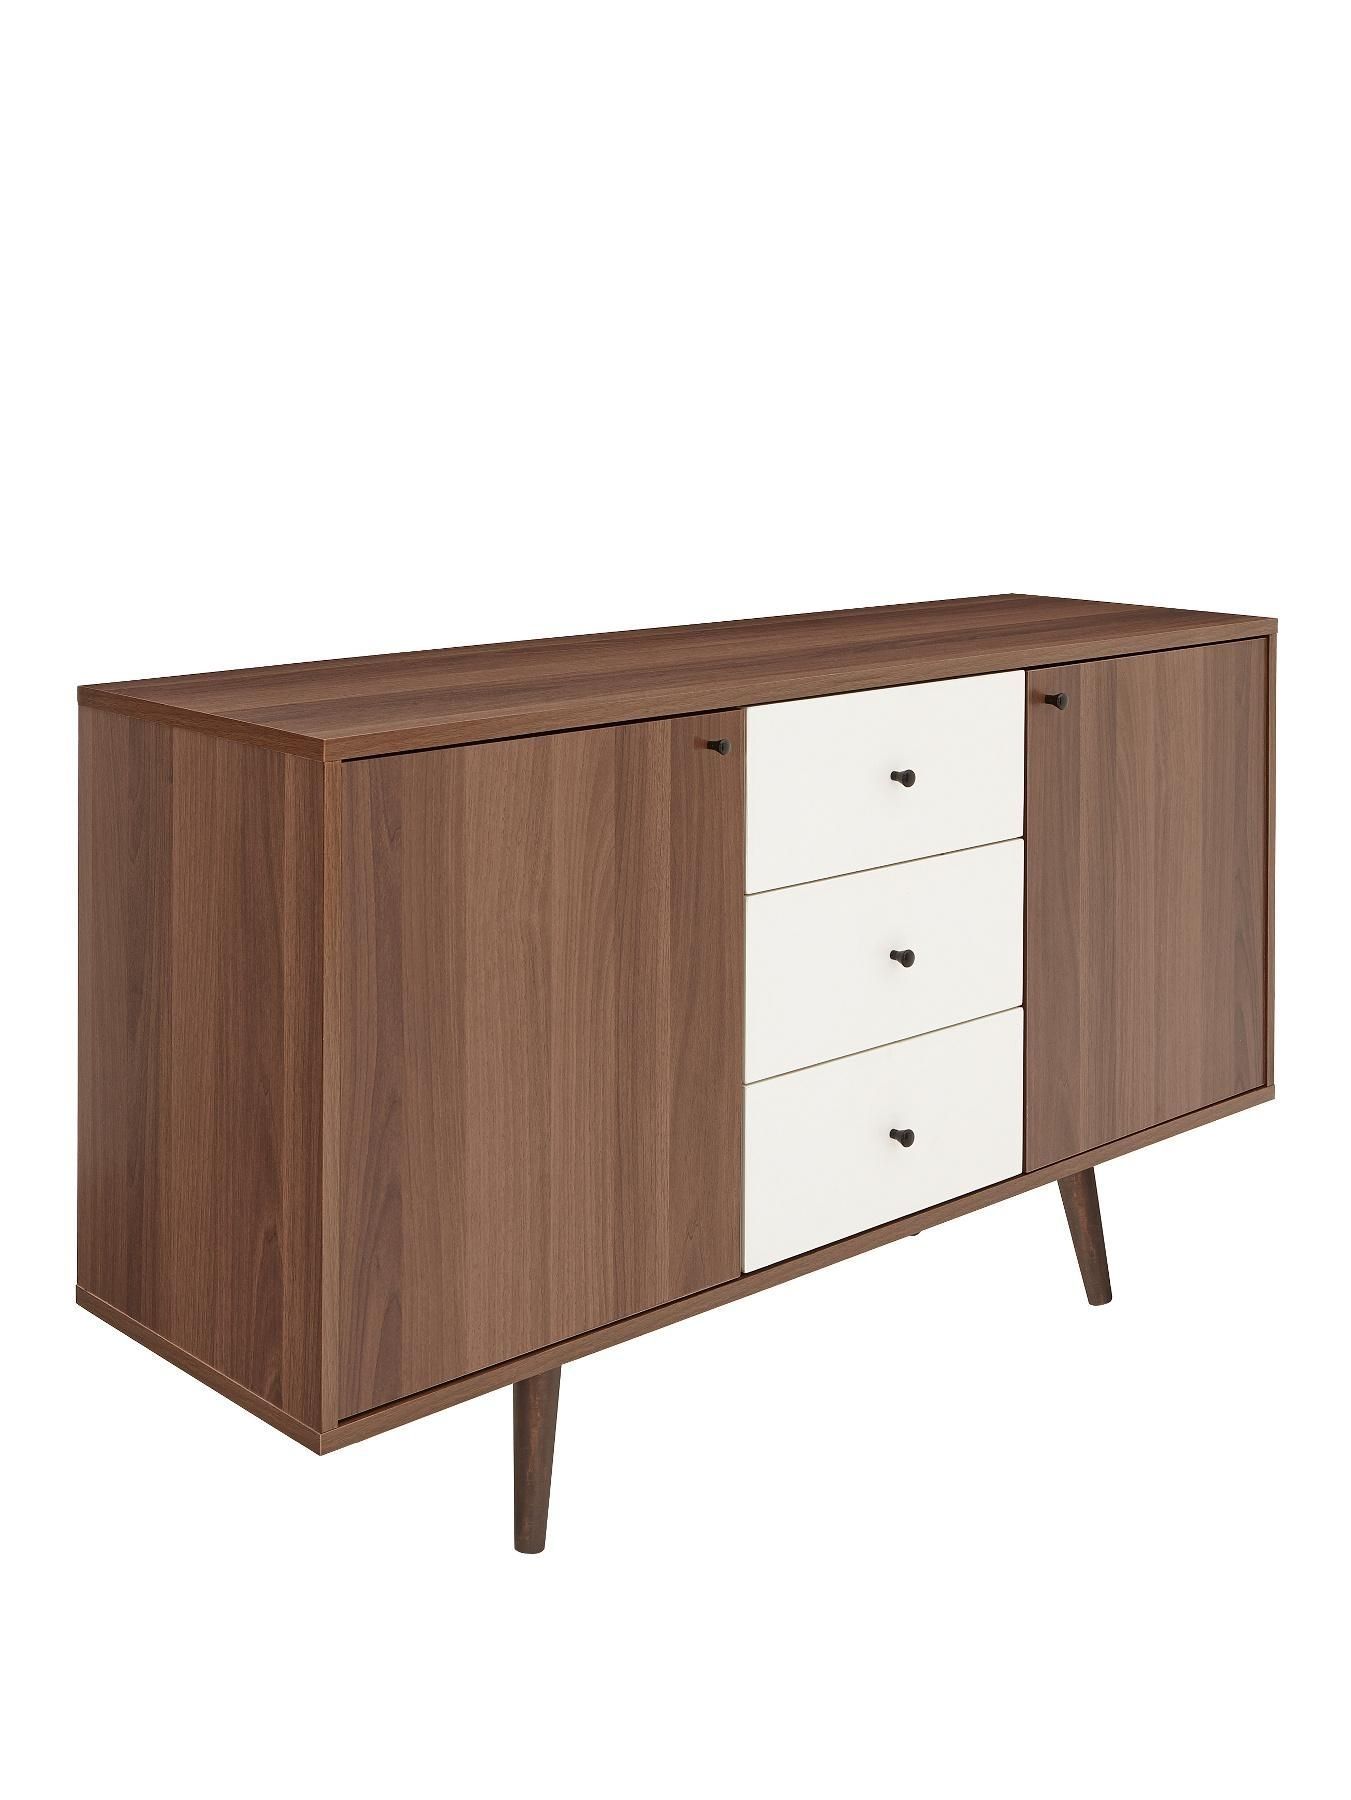 Monty Retro Large Sideboard | Energia Part 1 Office Finishes Throughout Walnut Finish 2 Door/3 Drawer Sideboards (View 4 of 30)